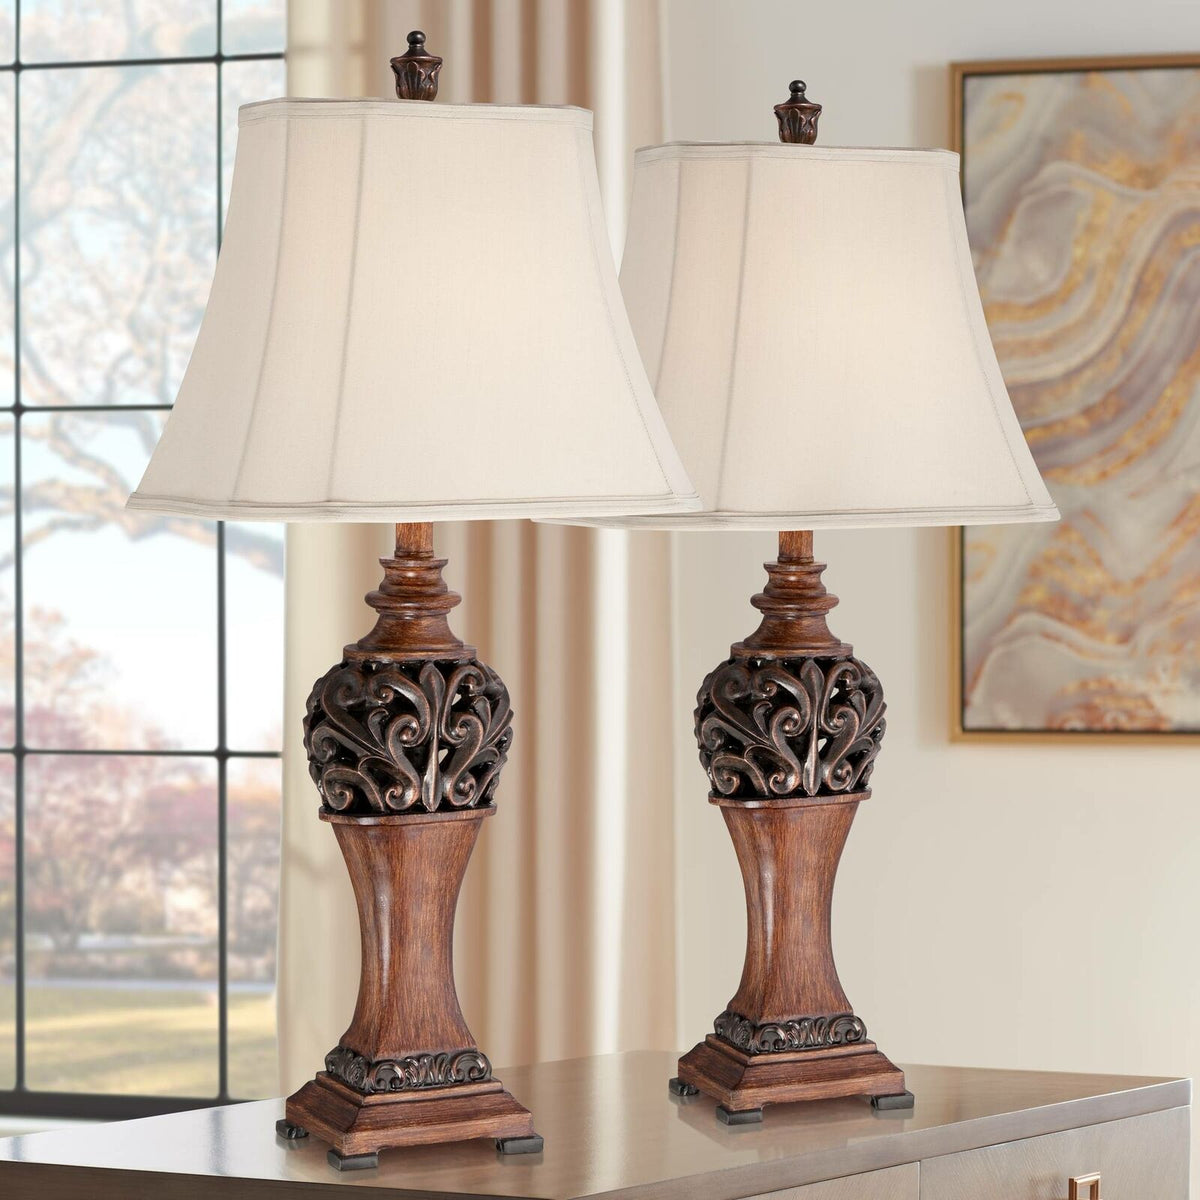 Set of 2 Traditional Design Carved Table Lamps with Wood-Tone Finish